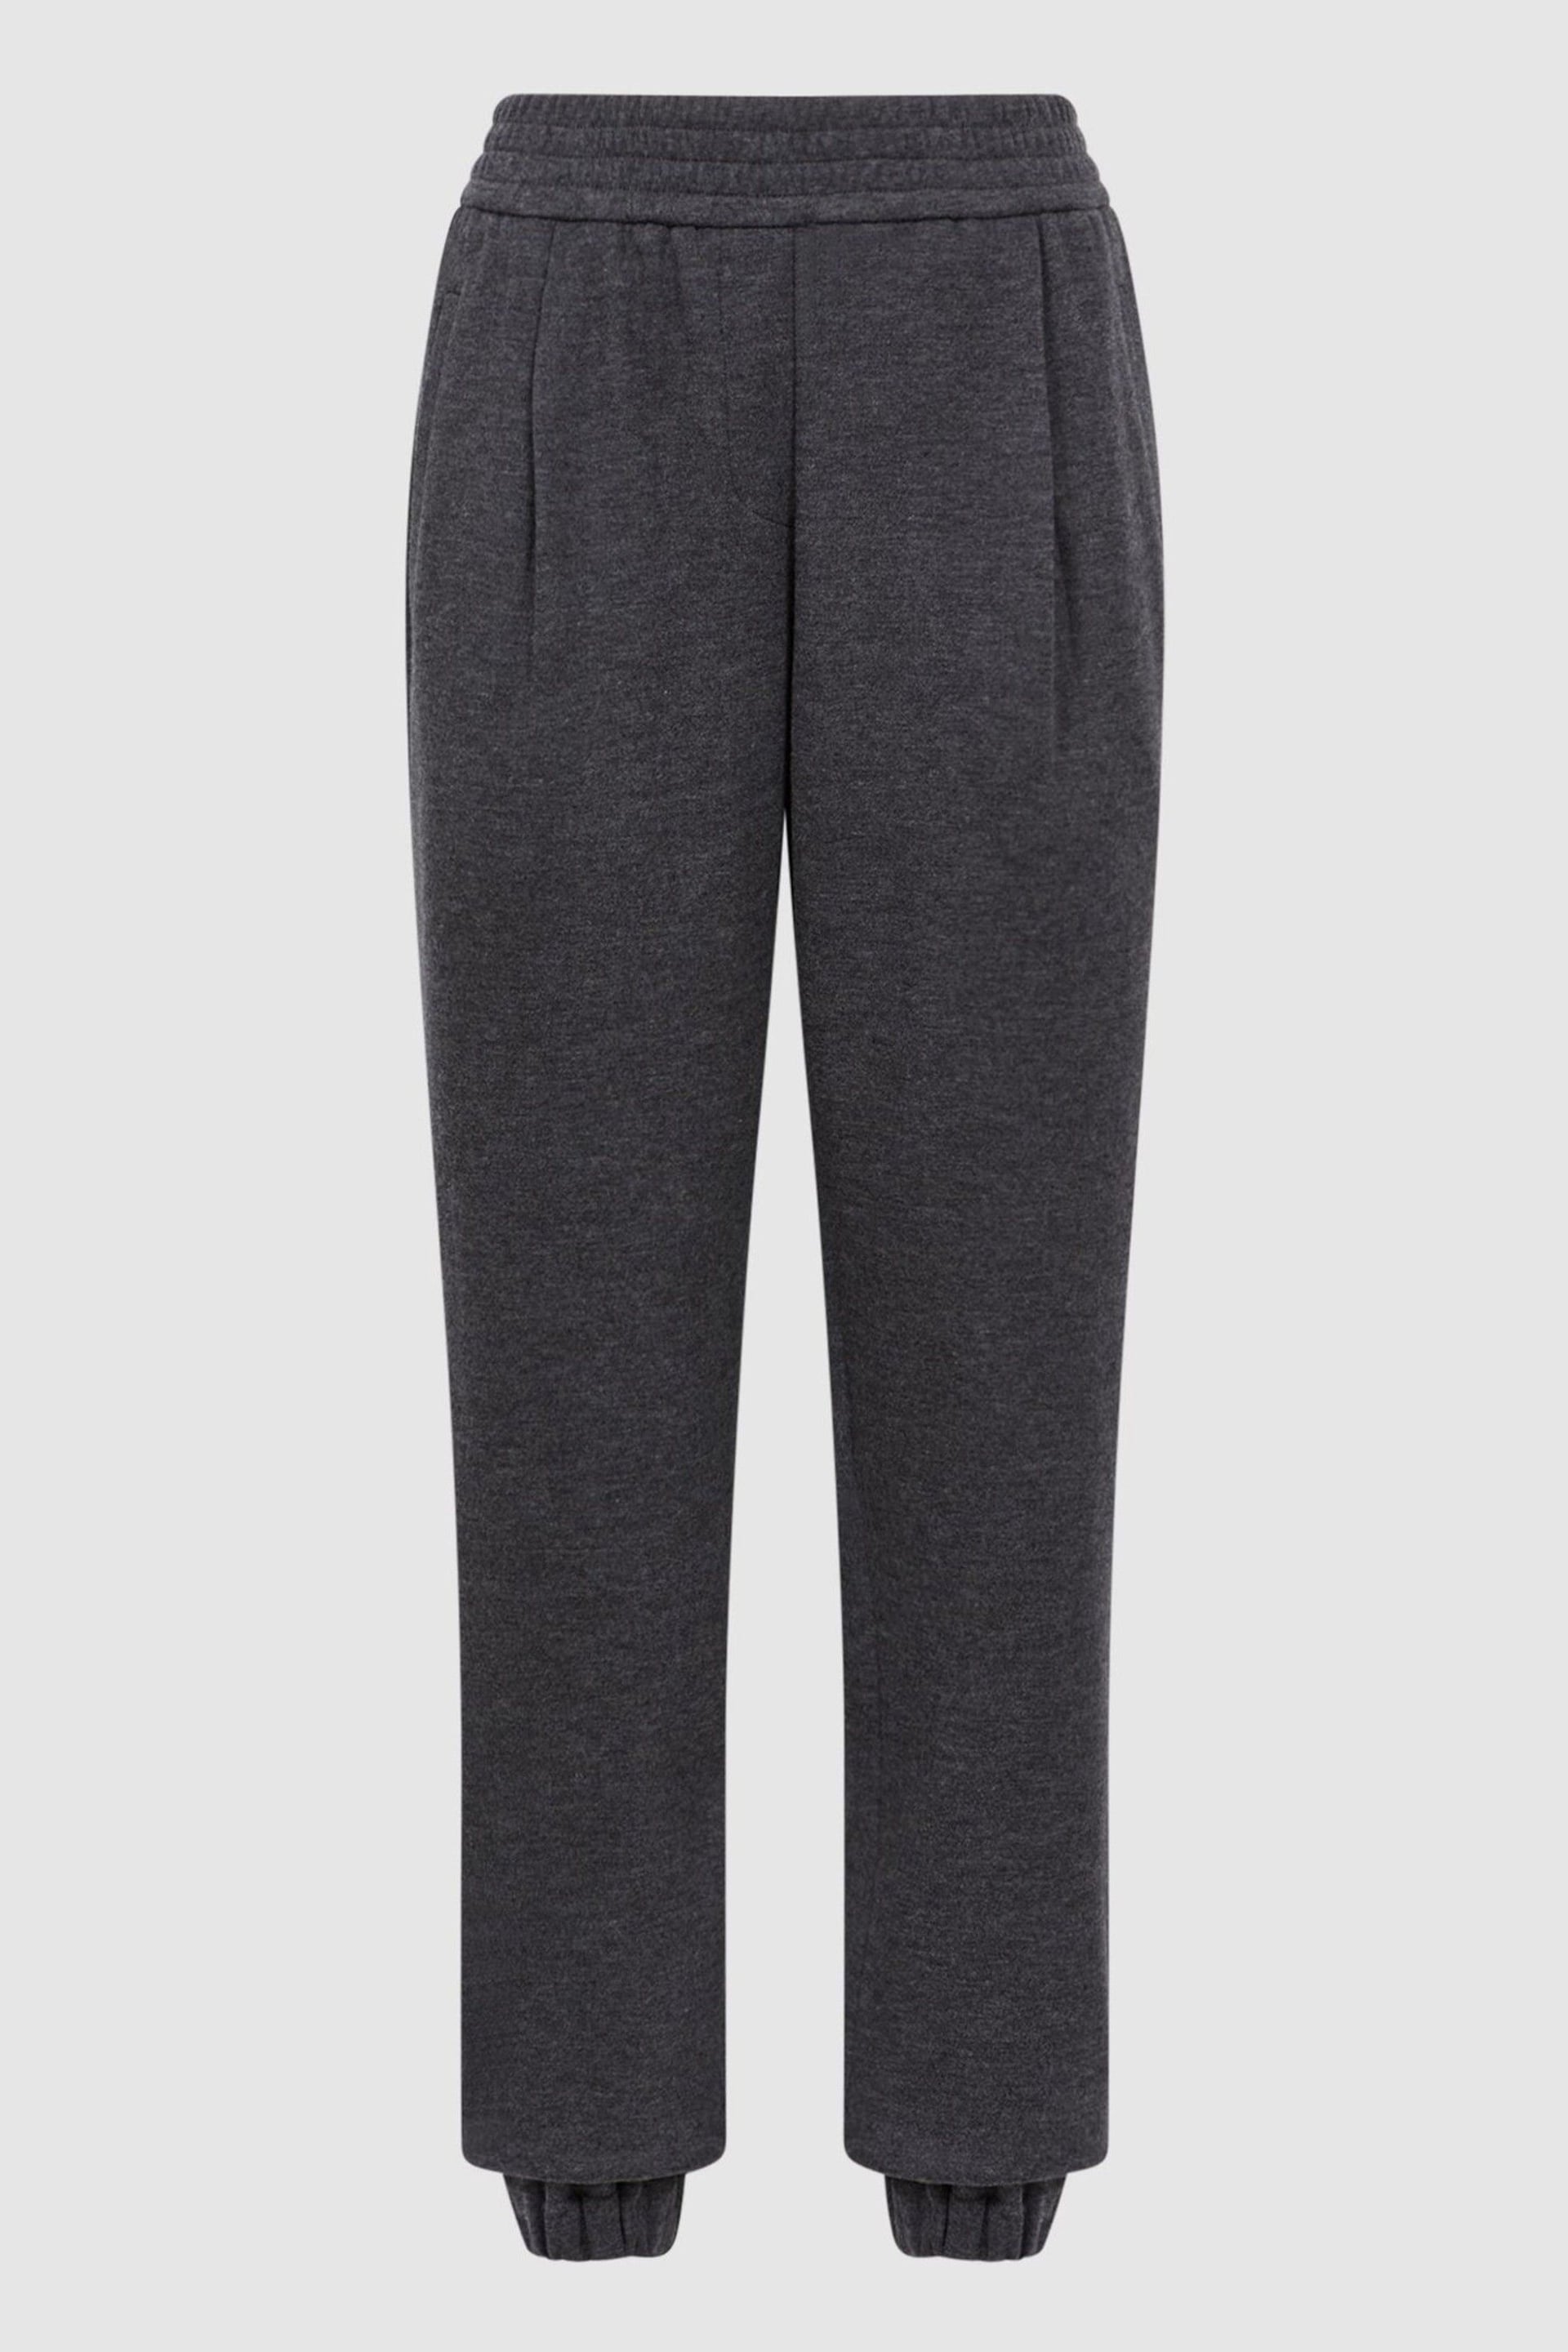 Reiss Charcoal Karina Wool Elasticated Pleat Front Joggers - Image 2 of 5